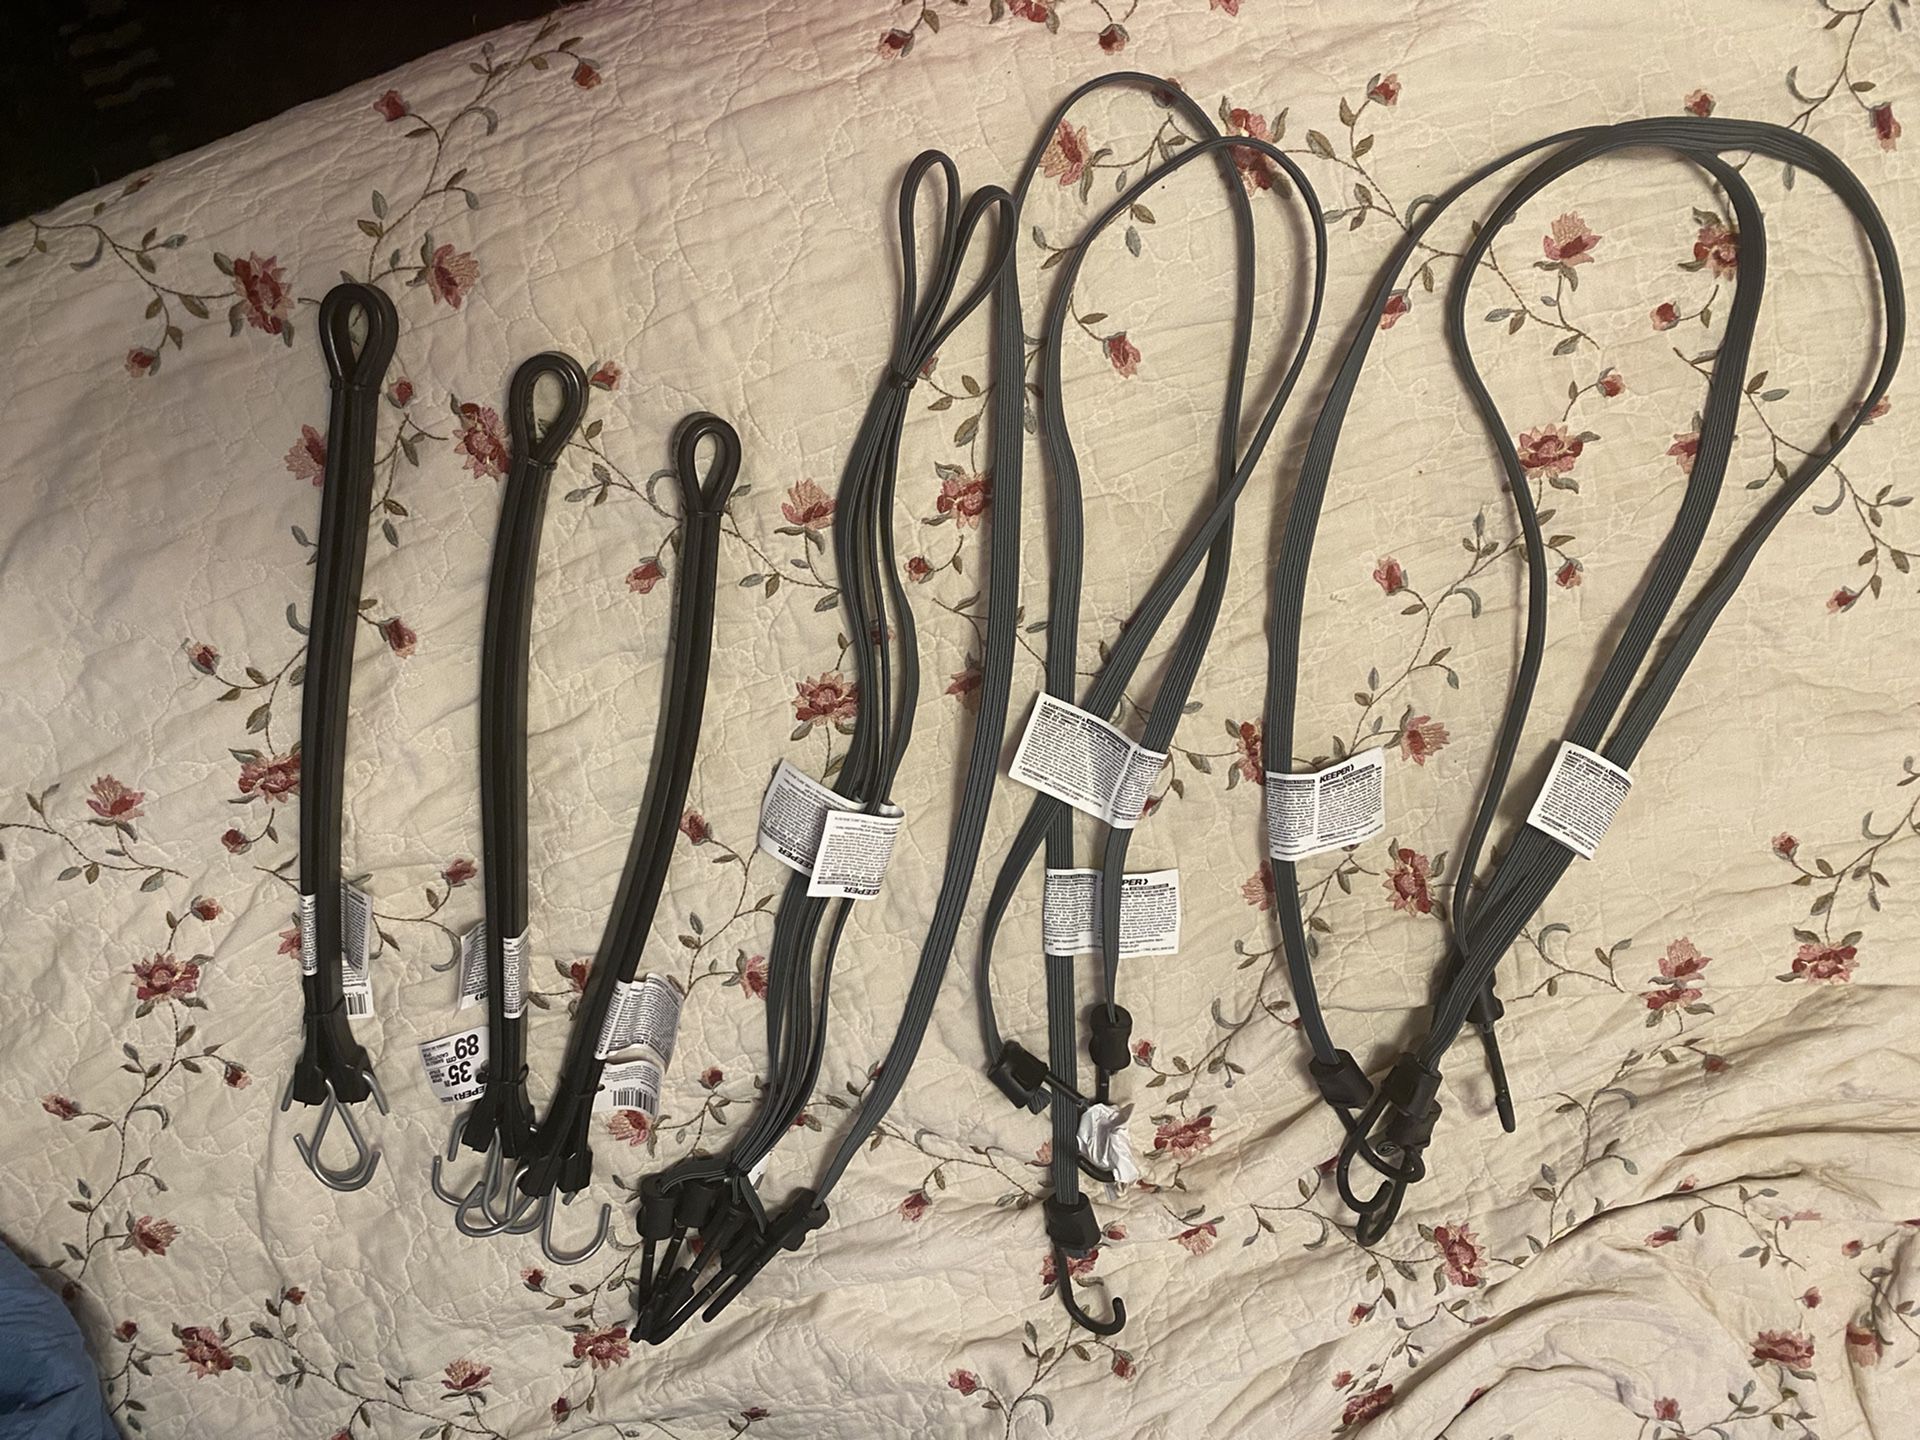 $30. (firm on price)-Nine long rubber/bungee straps. Brand new tags still on them. Paid $42 asking $30.